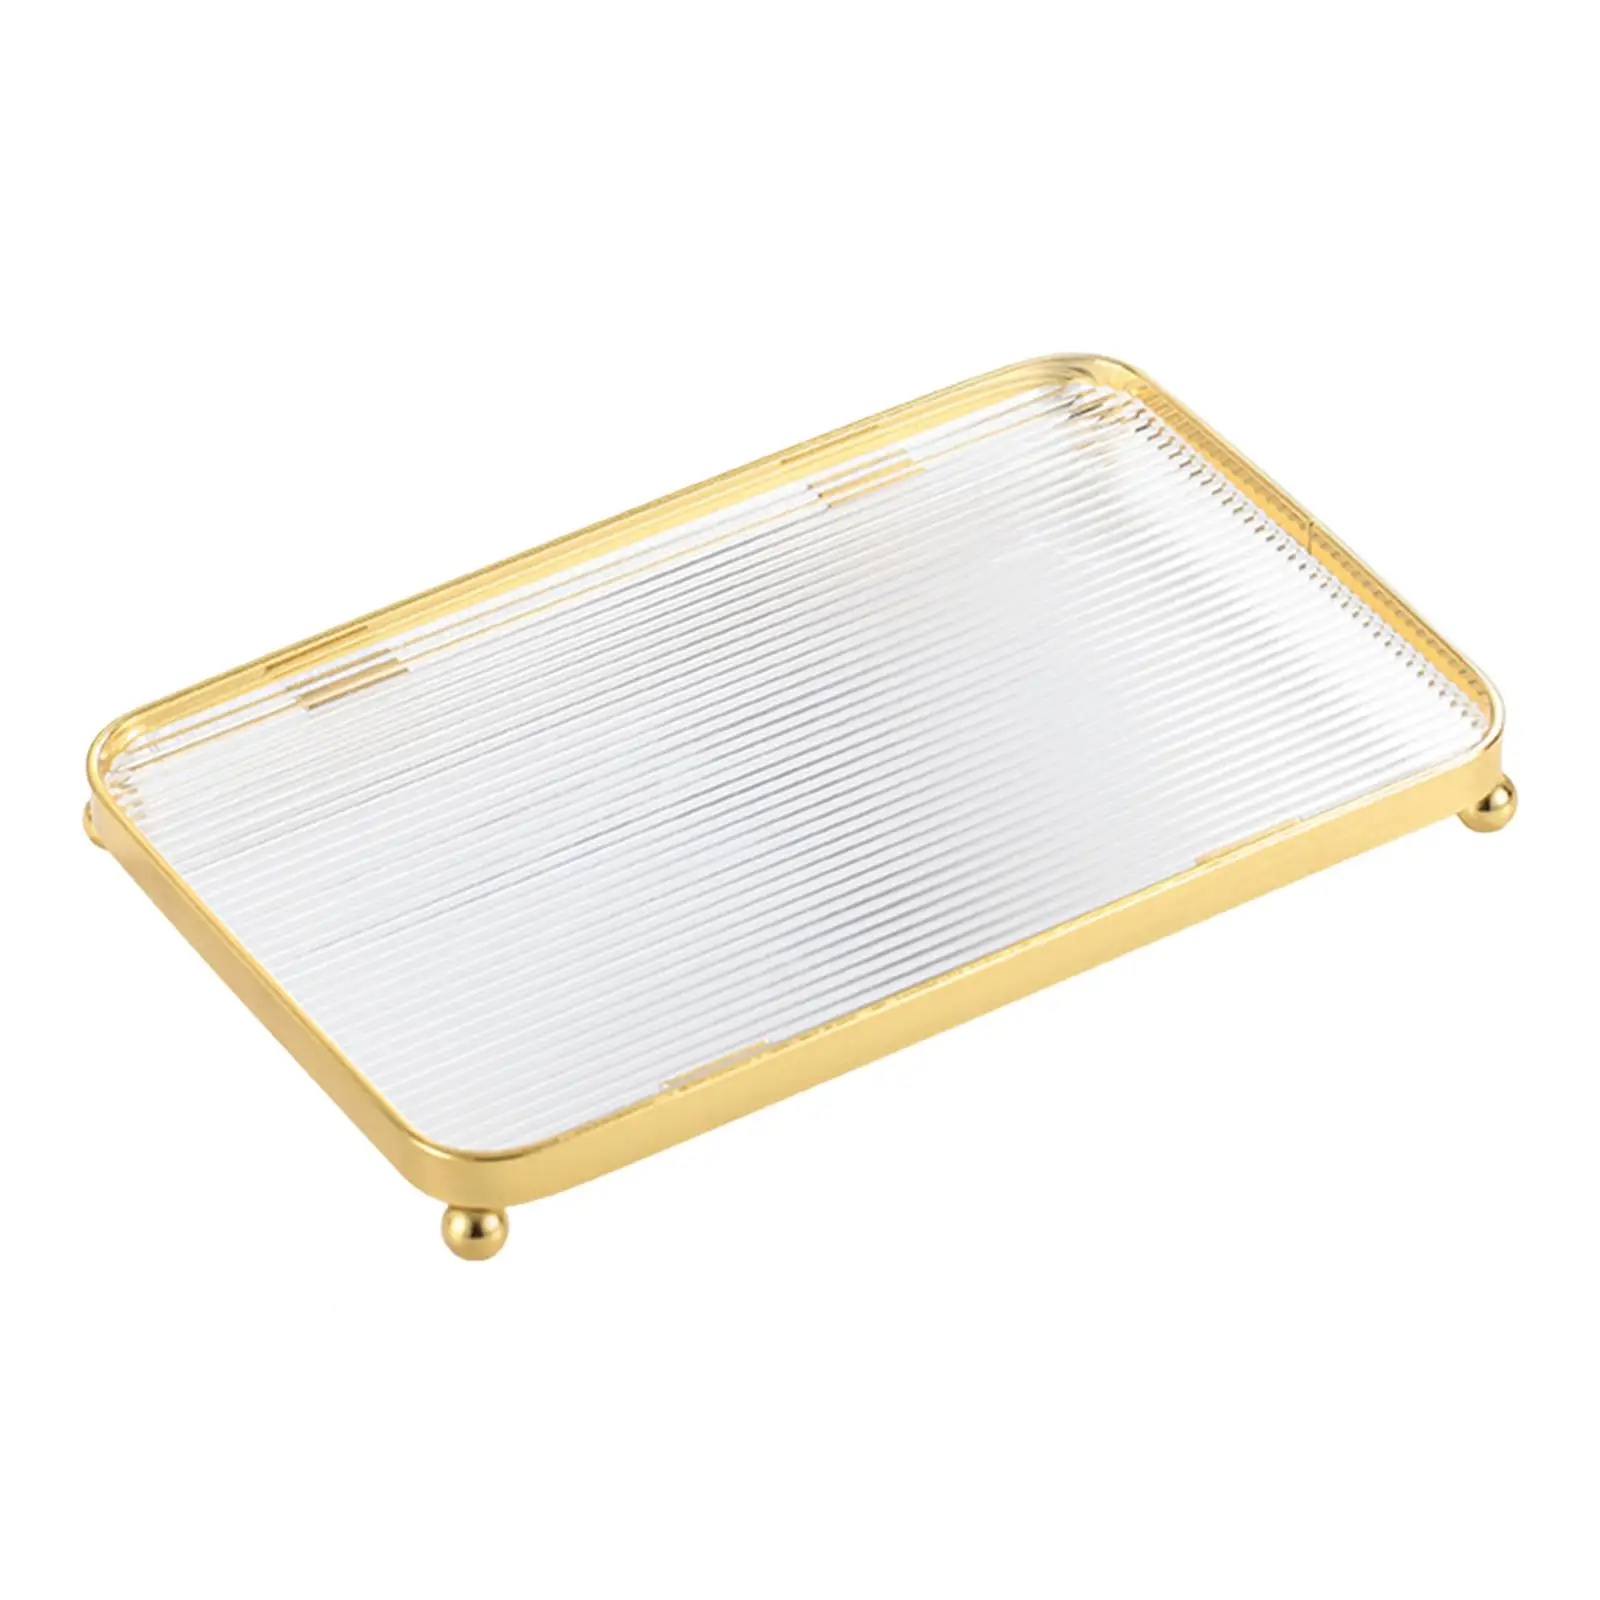 Home Organizer Plate kitchen Serving Tray for Breakfast Drinks Cookie